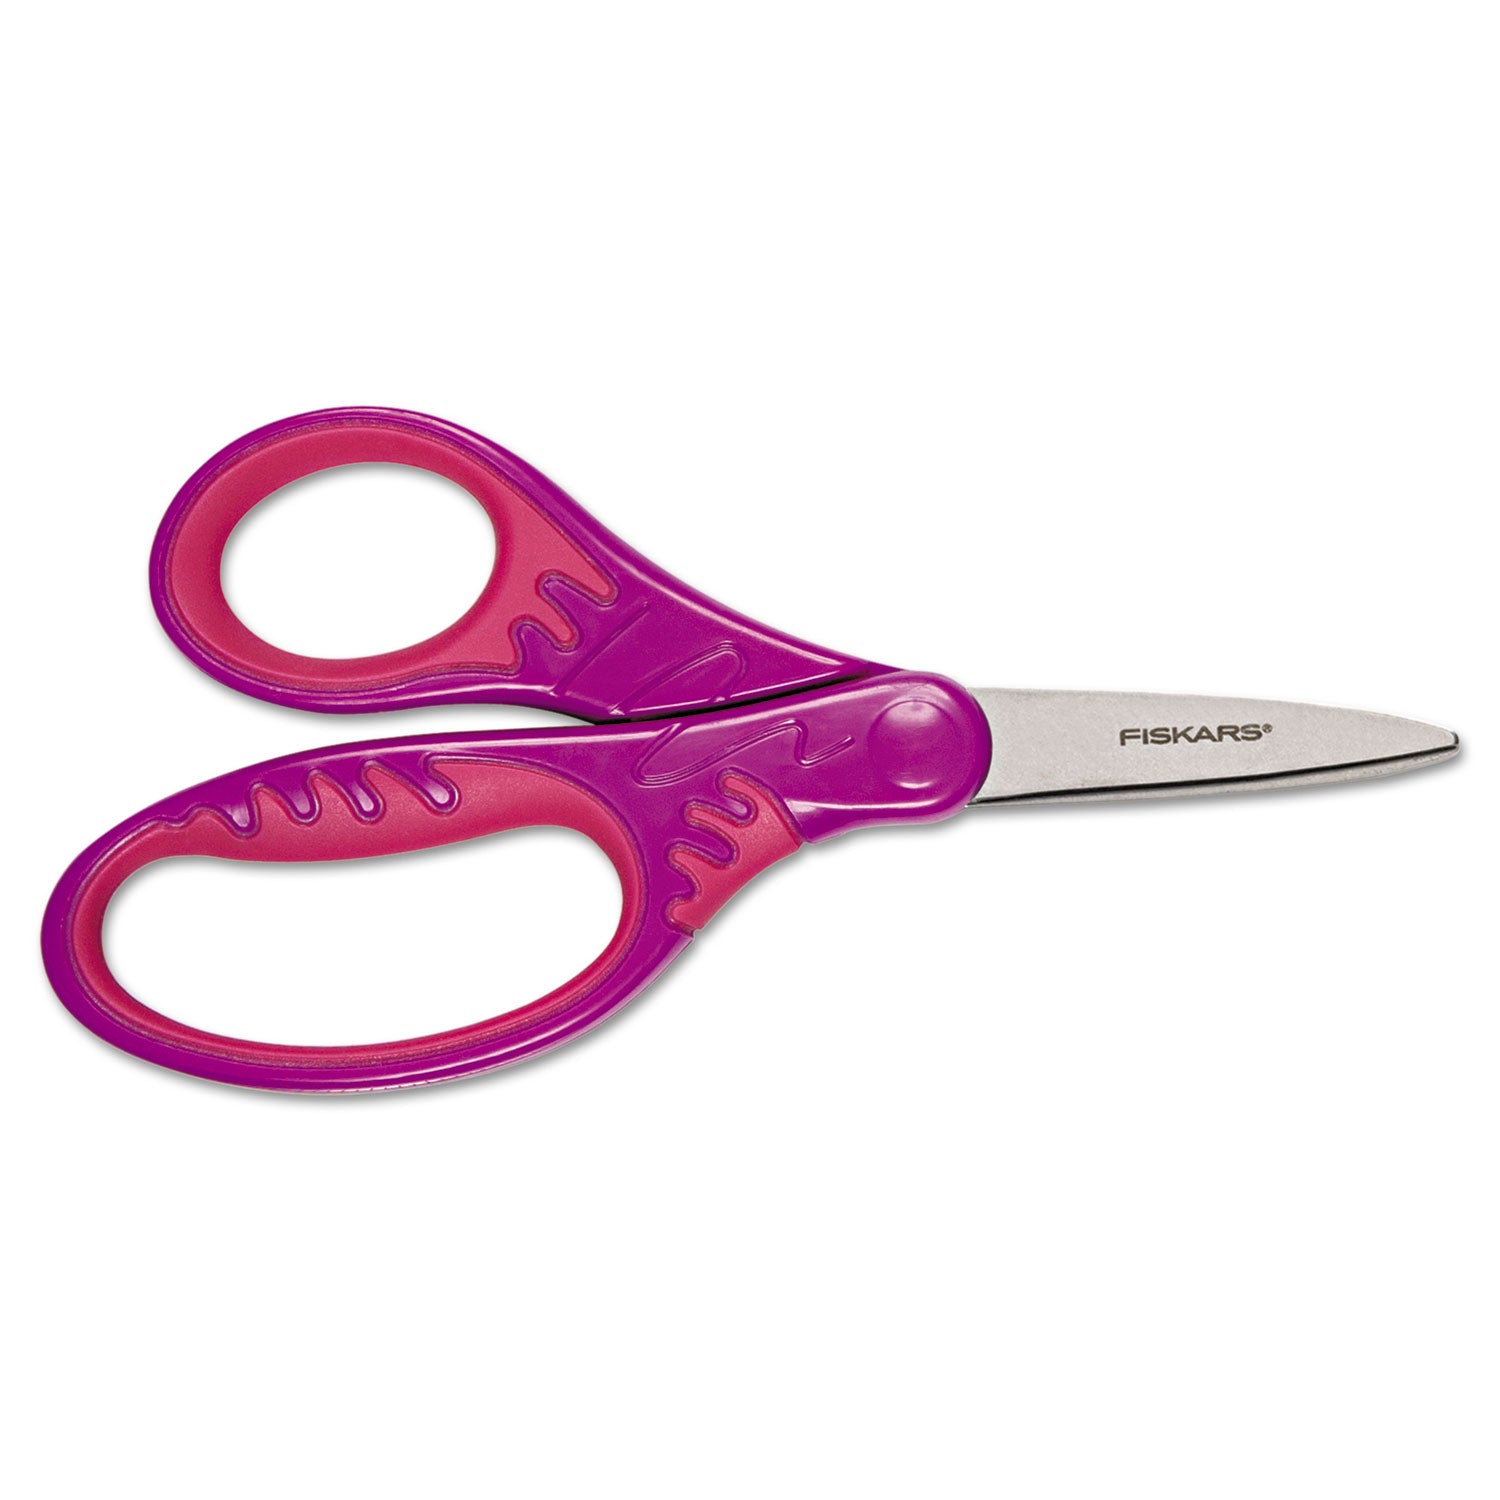 Kids/Student Softgrip Scissors, Pointed Tip, 5 Long, 1.75 Cut Length, Randomly Assorted Straight Handles - 